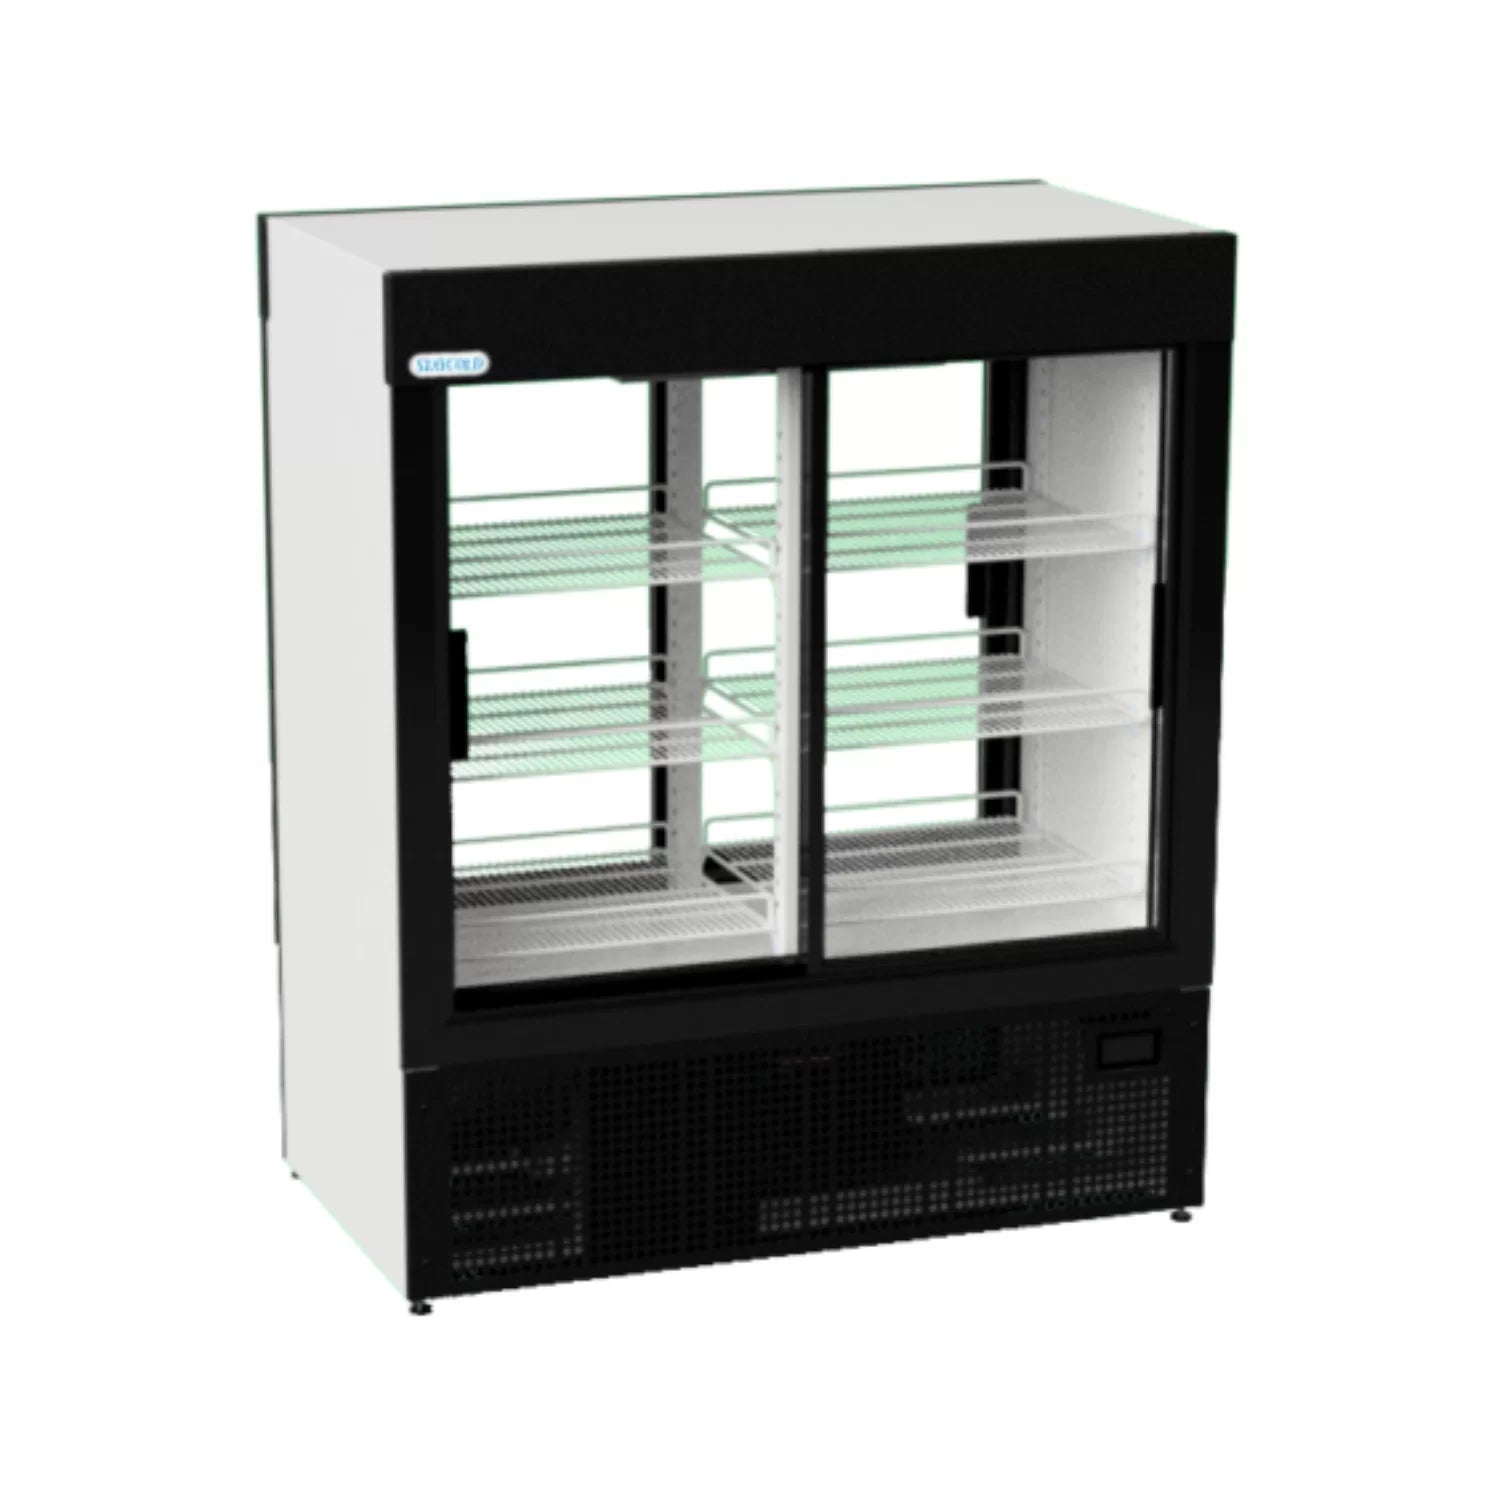 SD1140-FLC Double Sliding Door Fast Lane Cooler STAYCOLD/ALPACO CATERING